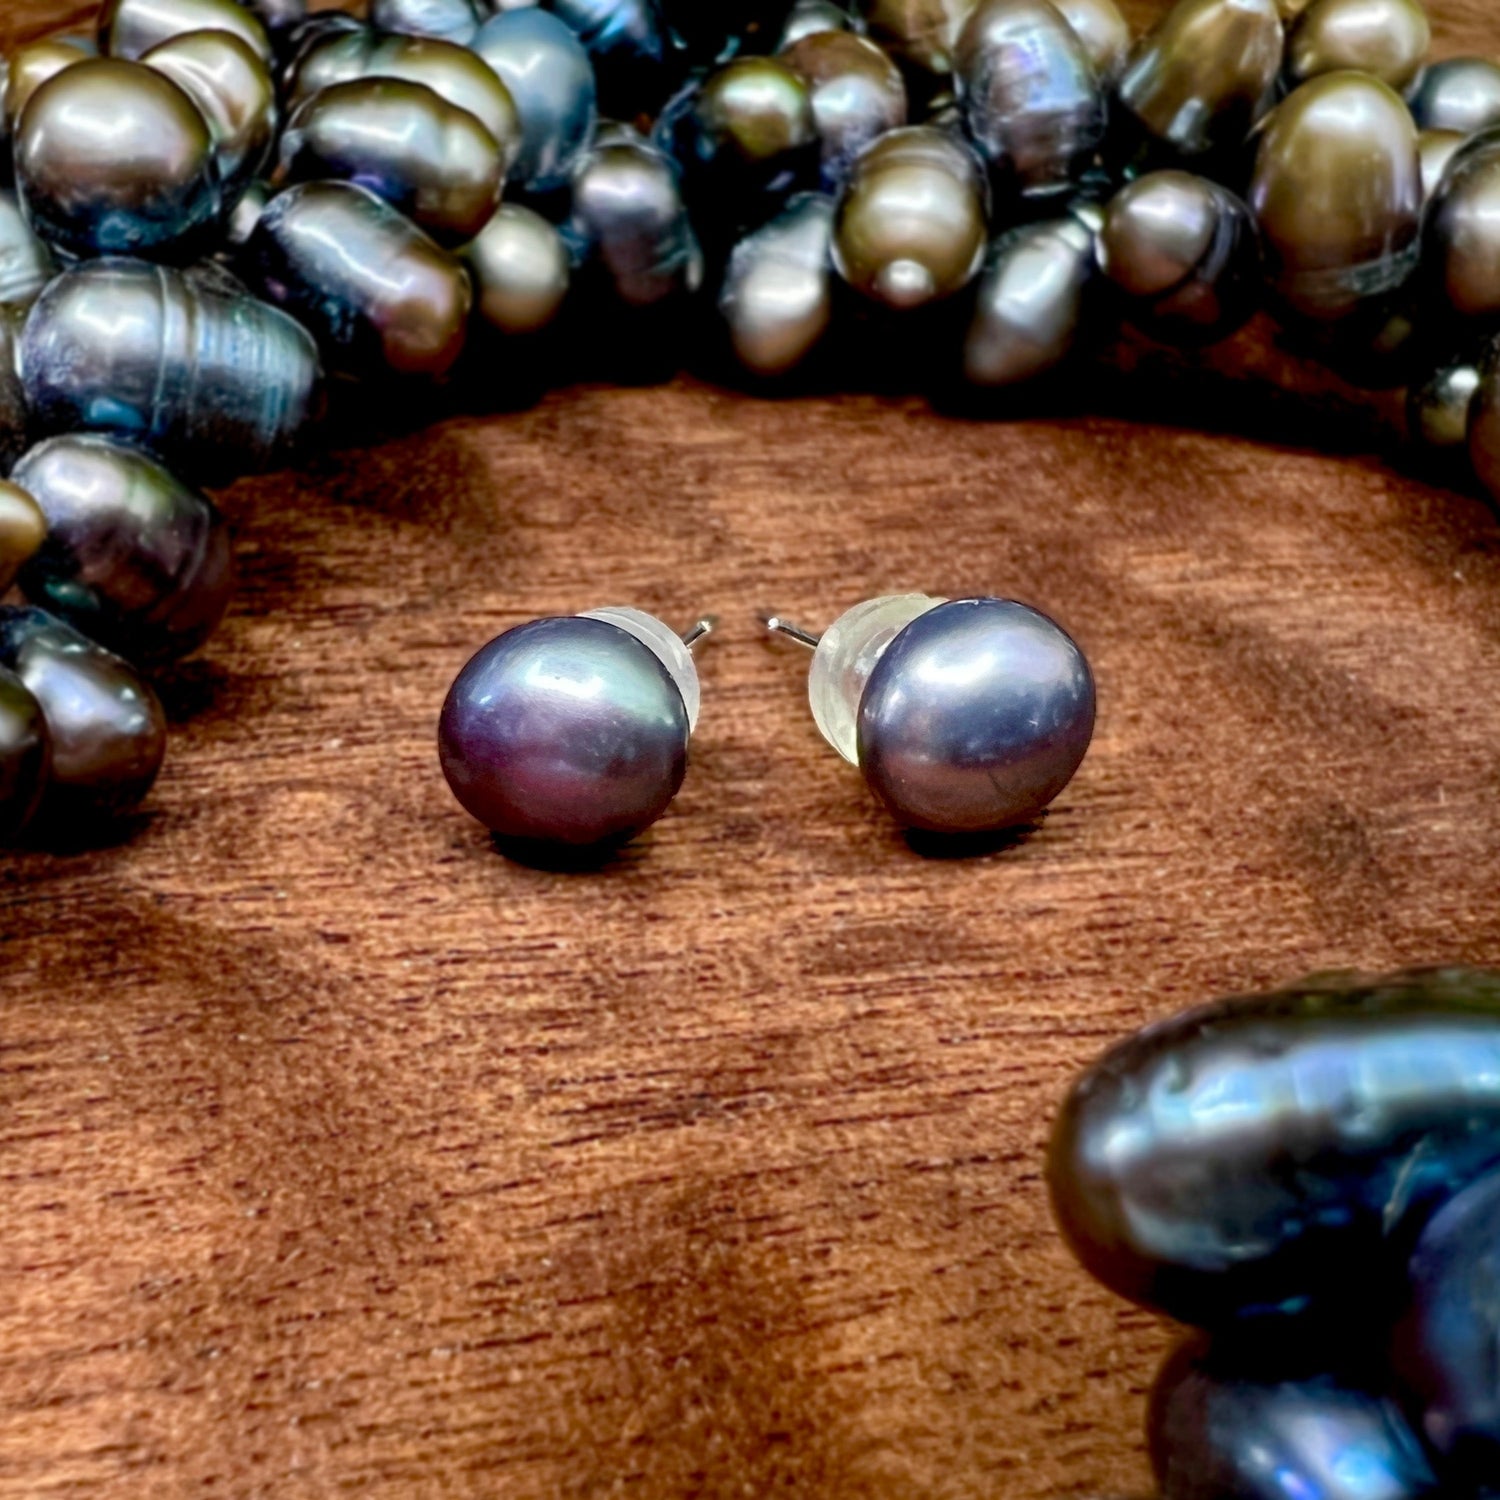 Matching Pearls for a Pearl Necklac